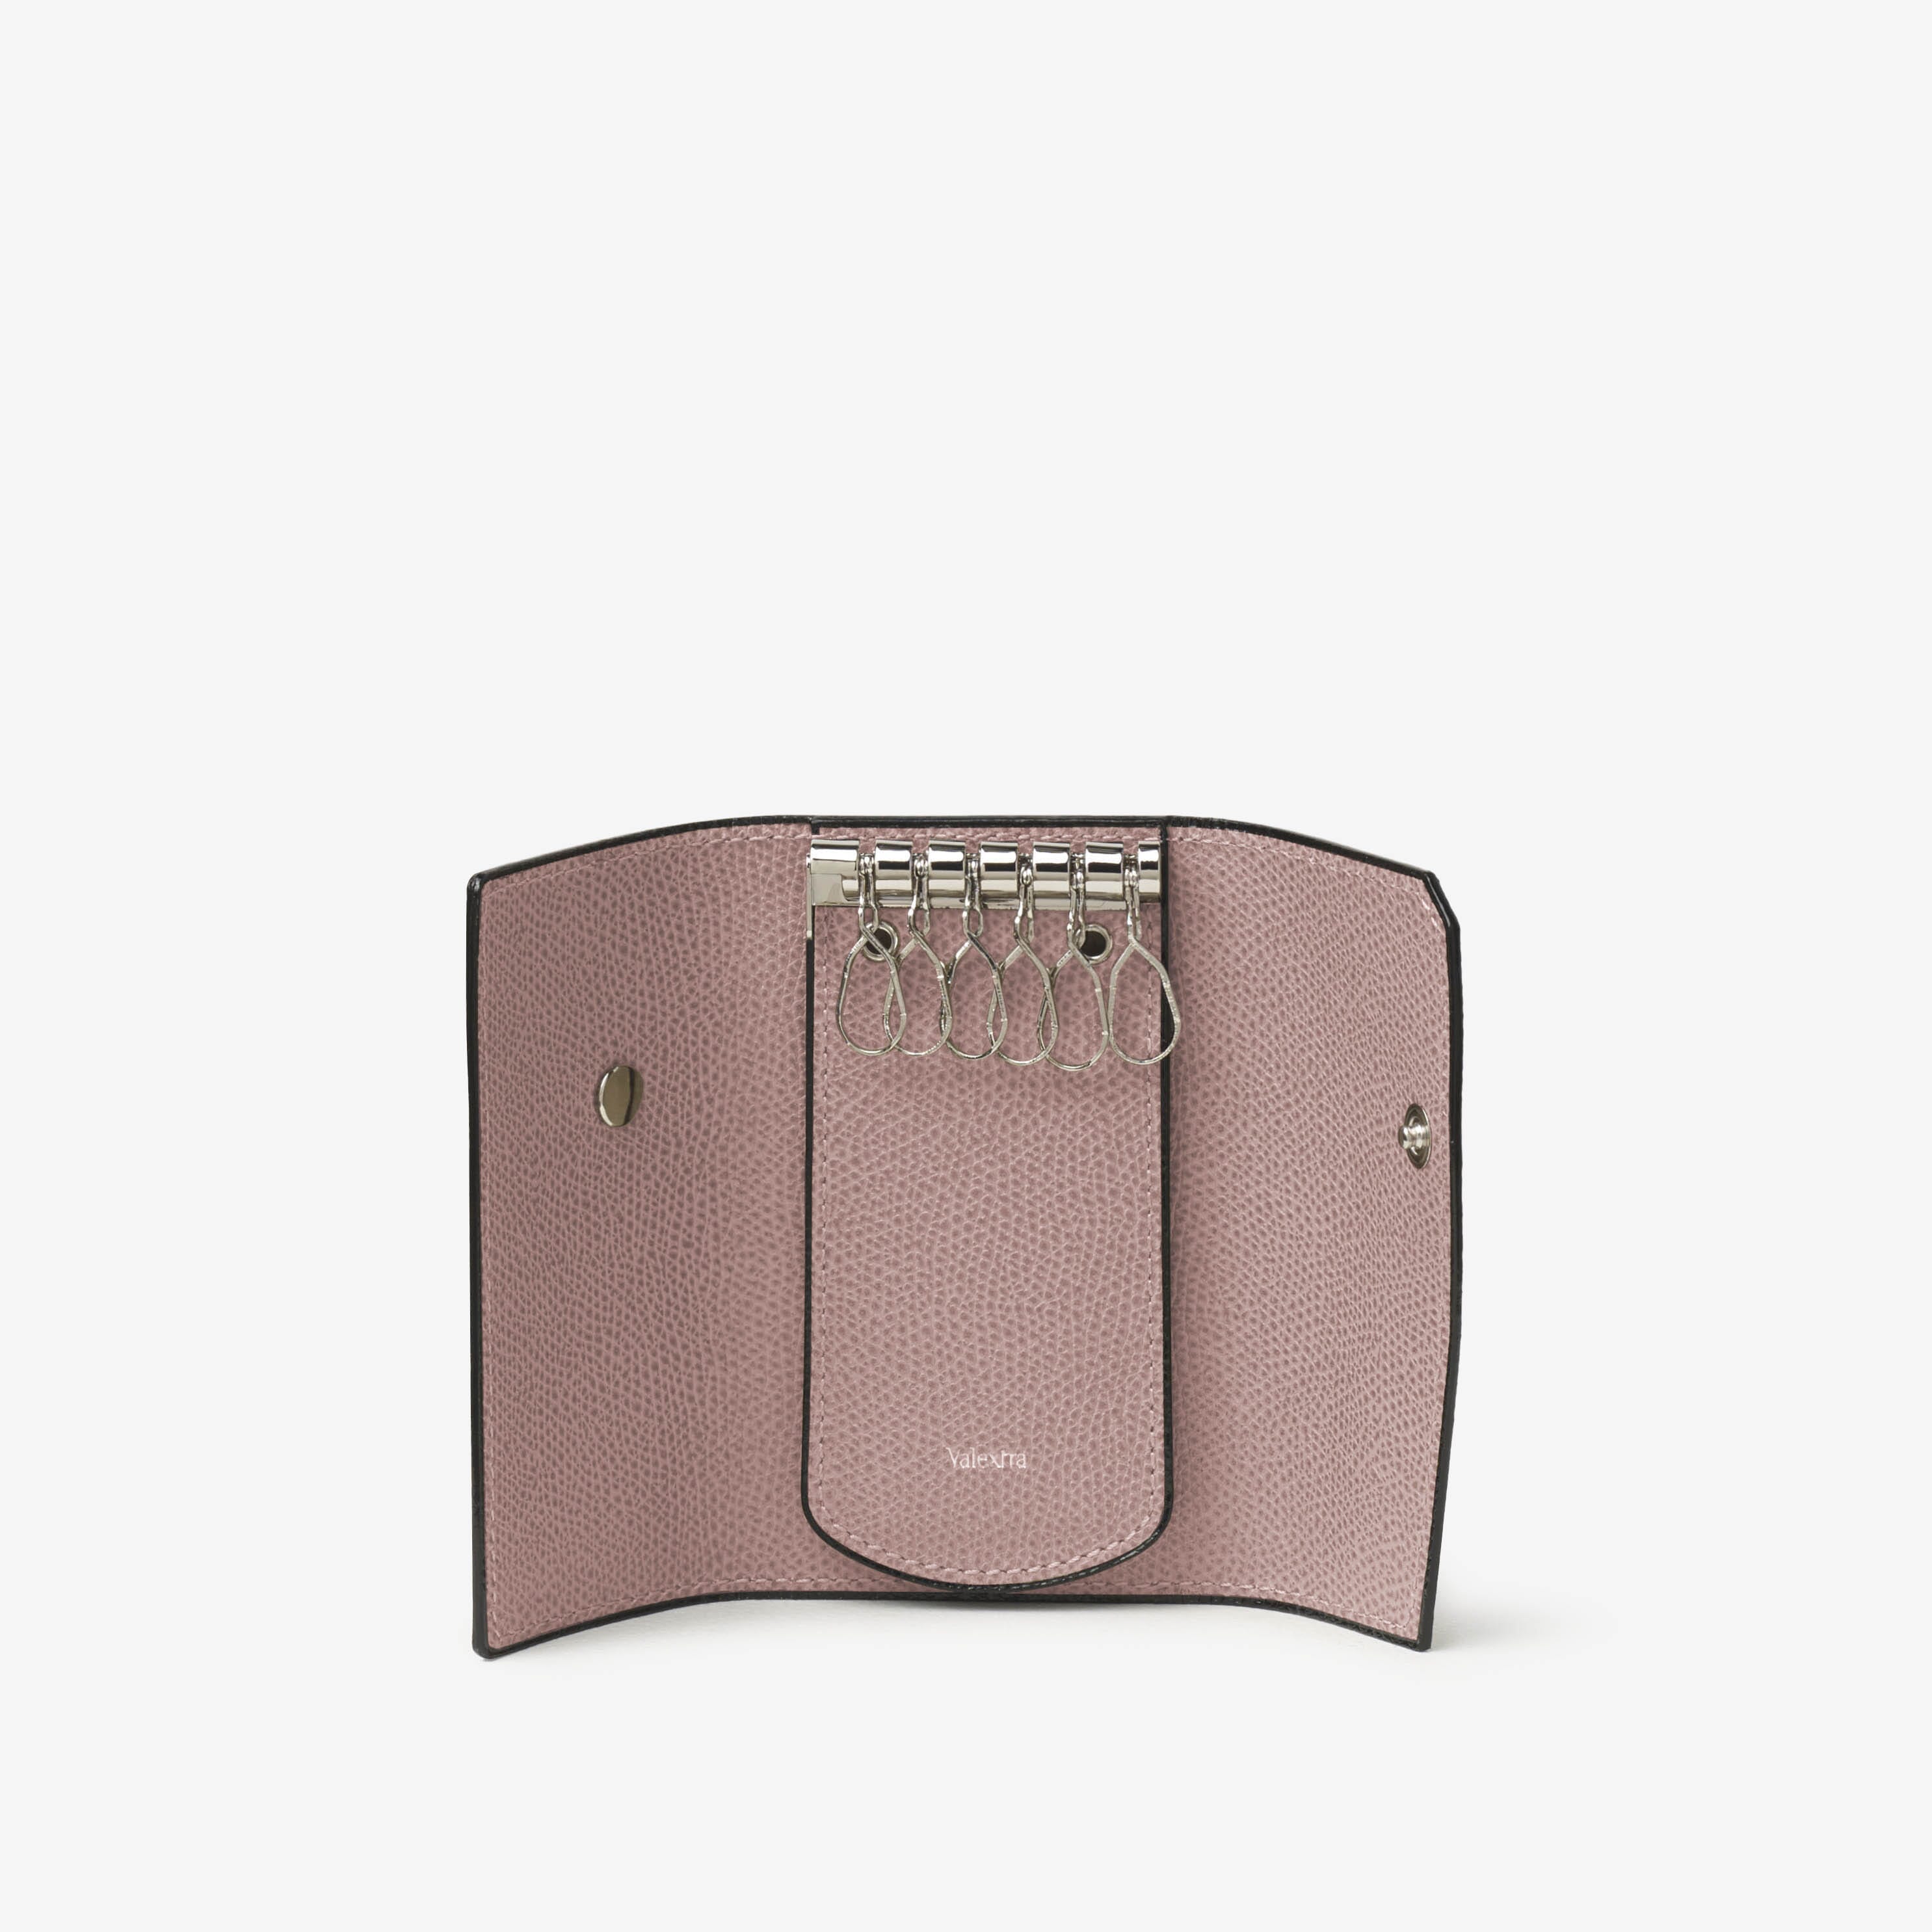 Buy Louis Vuitton Key Pouch Online In India -  India